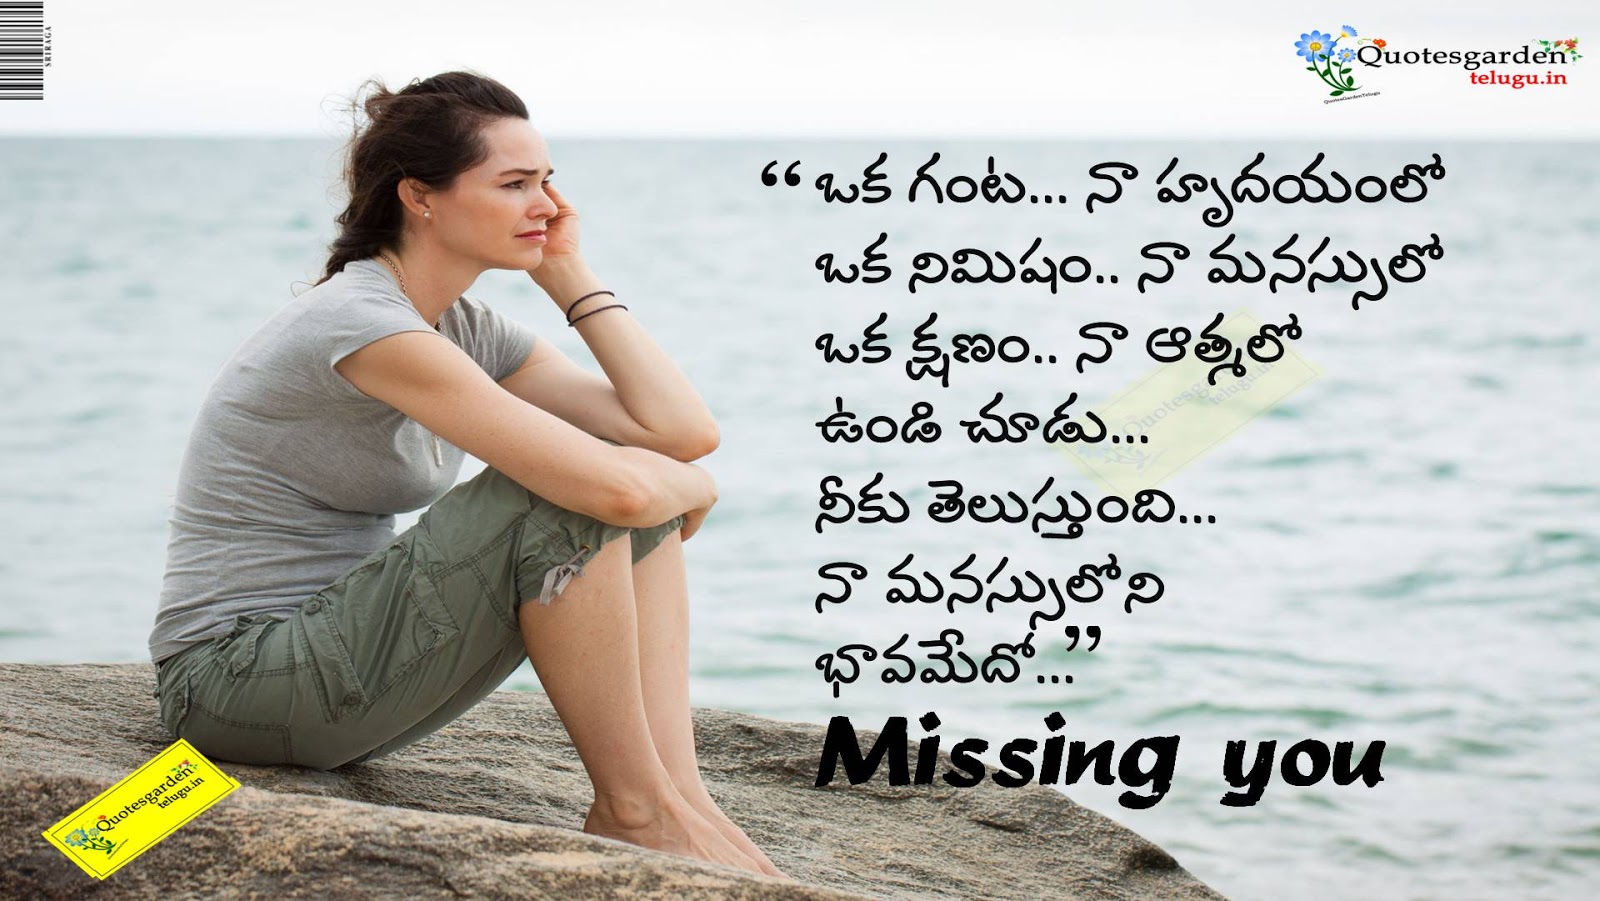 Missing you Friendship day Quotes in telugu heart touching Telugu ...